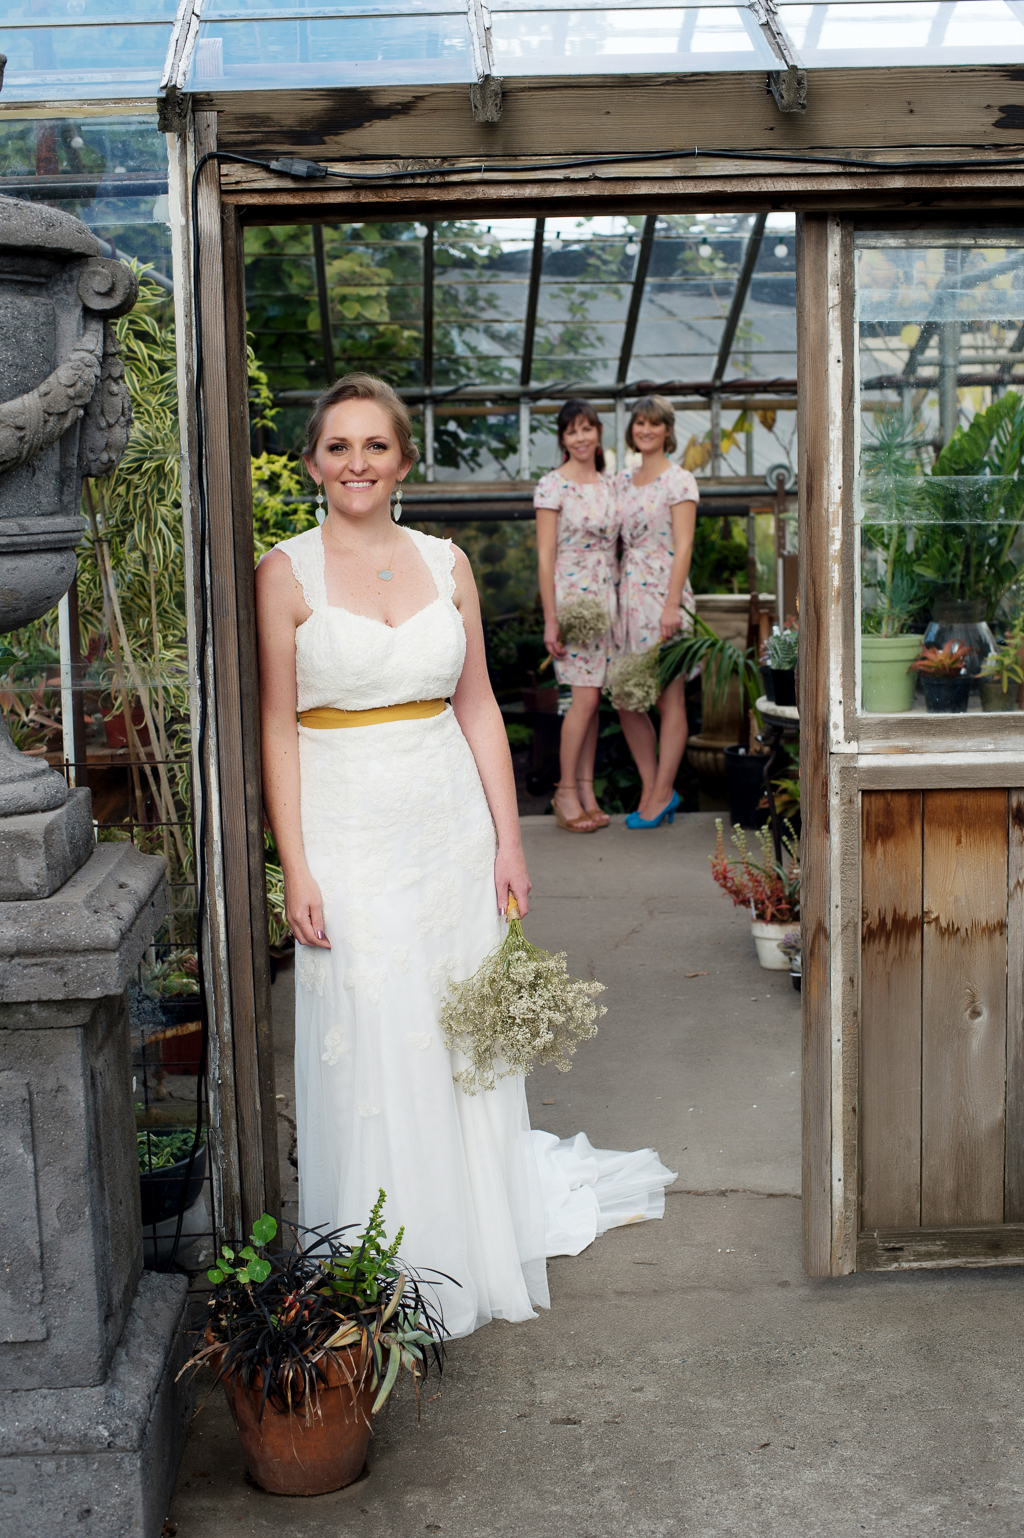 a bride holding a bouquet of baby's breath stands in the doorway of a greenhouse with her bridesmaids in the background